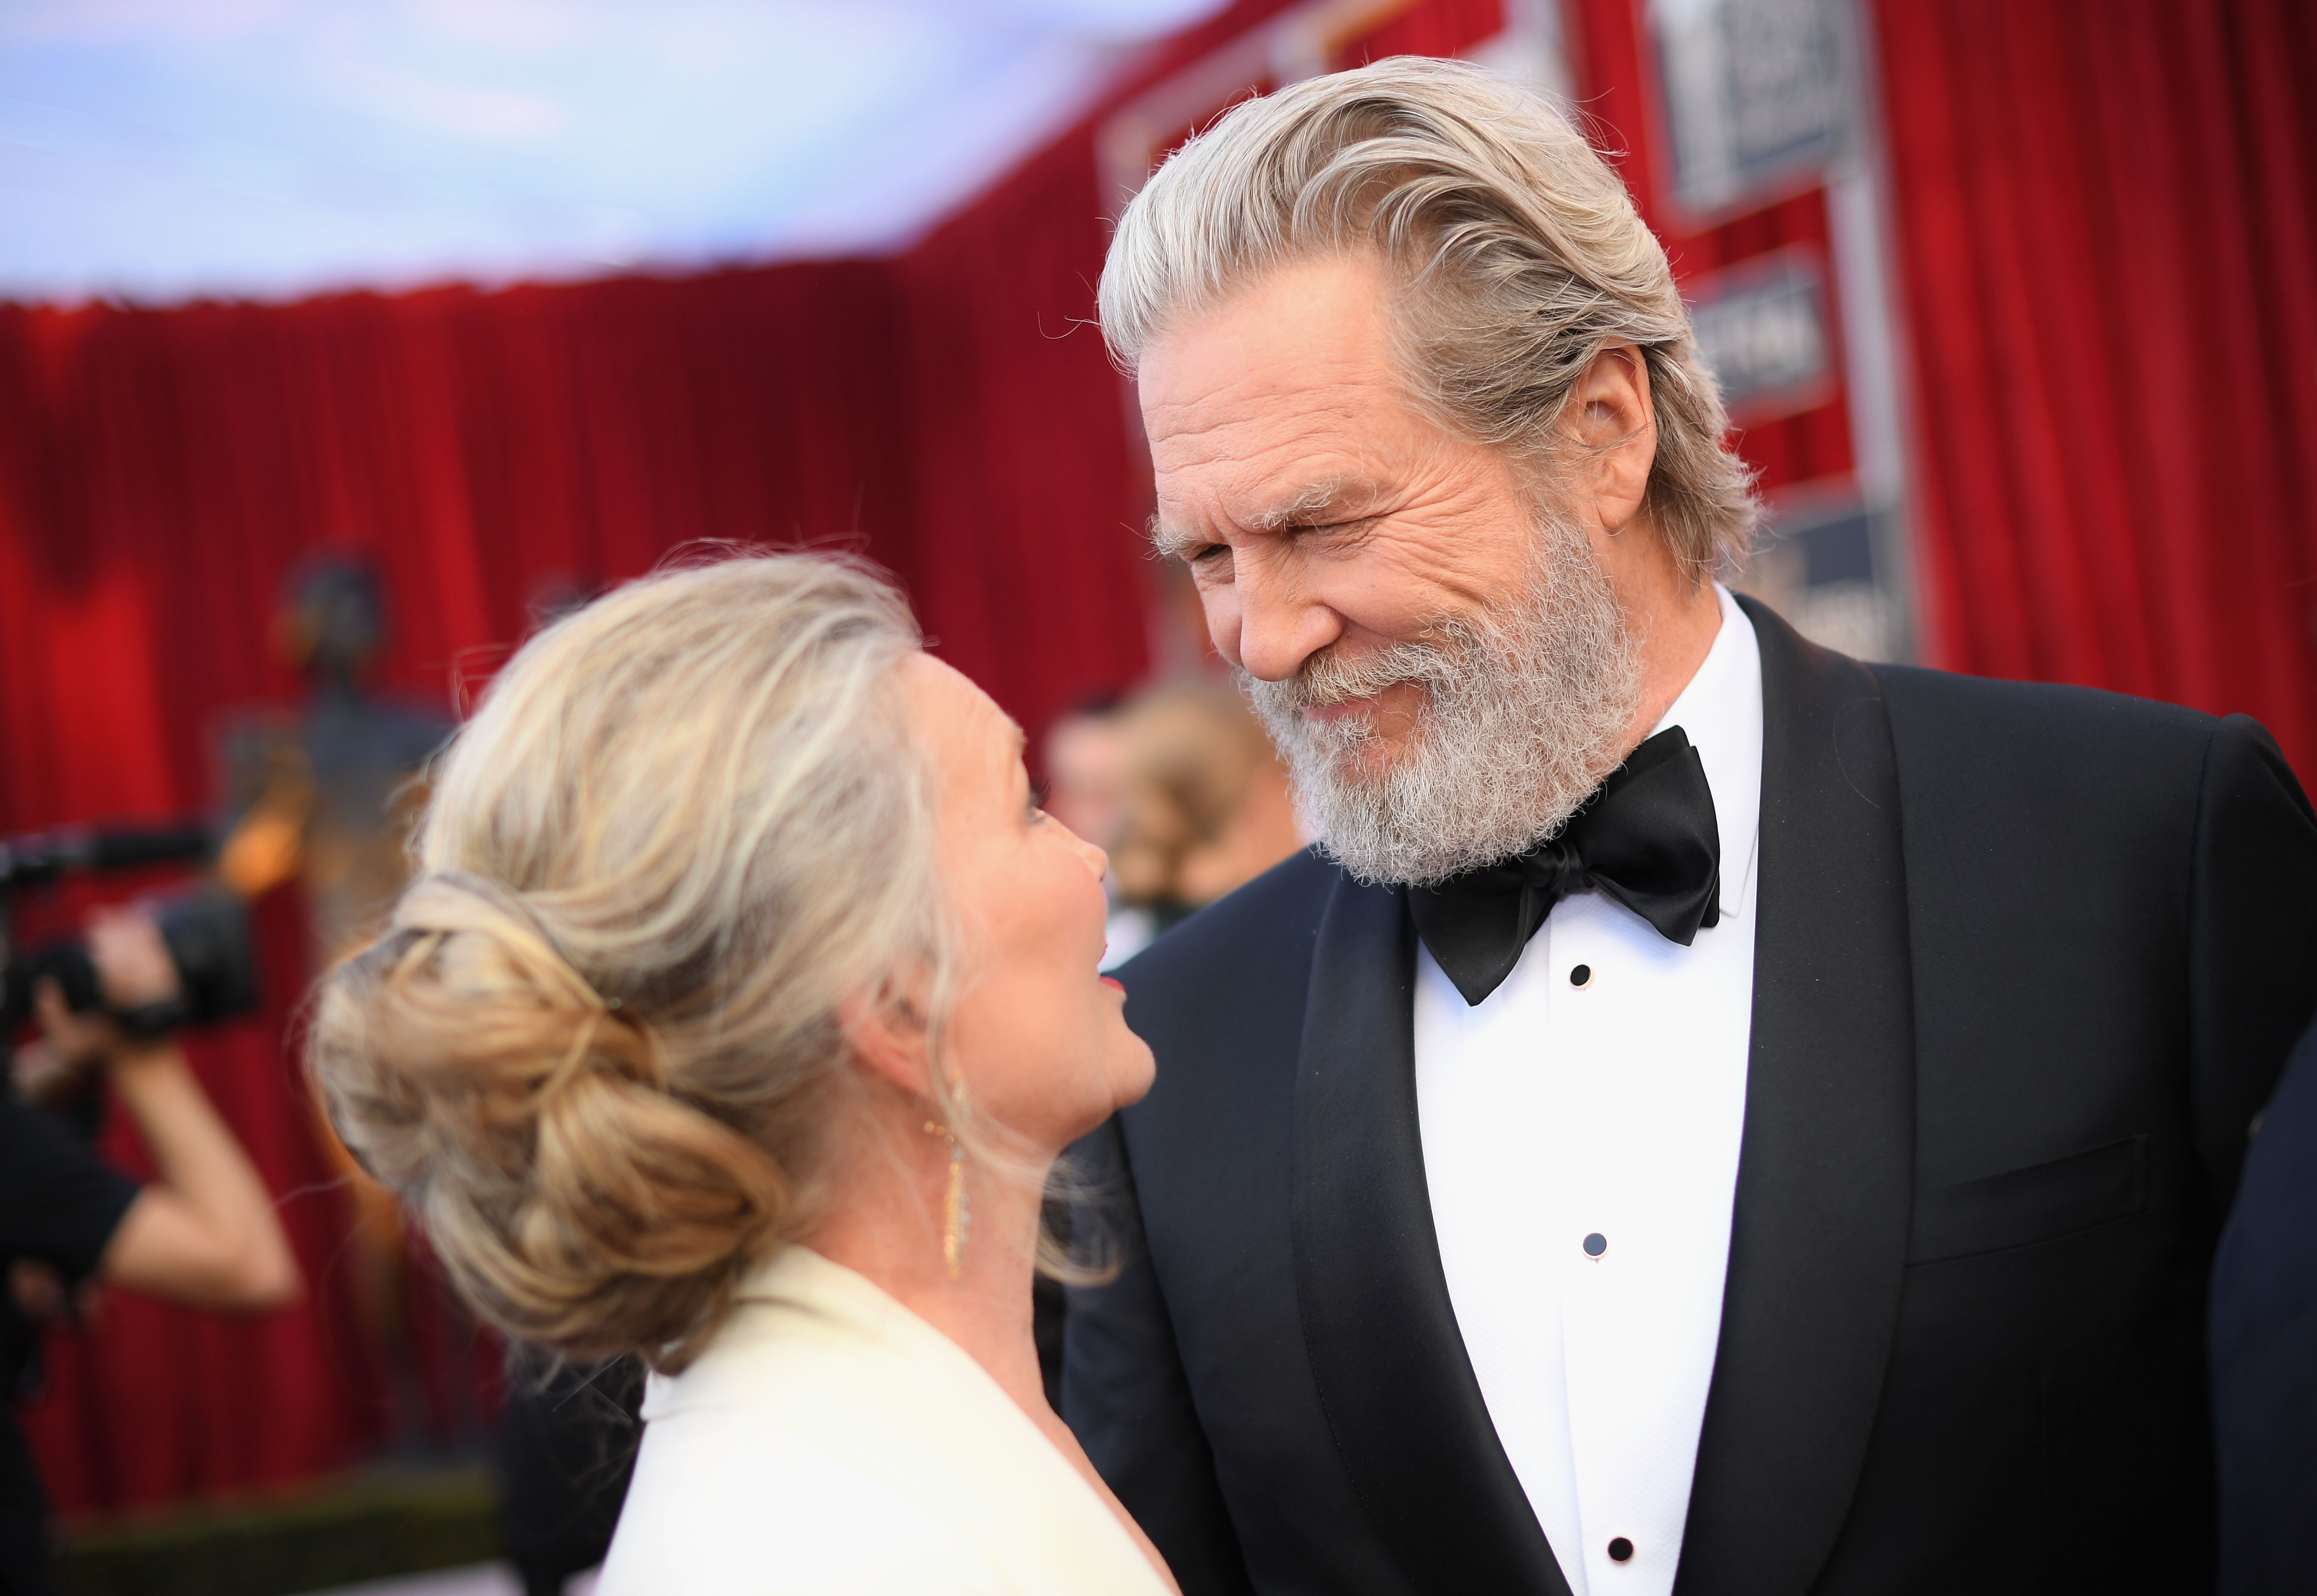 Susan and Jeff Bridges attend The 23rd Annual Screen Actors Guild Awards at The Shrine Auditorium in Los Angeles, California on January 29, 2017. | Source: Getty Images